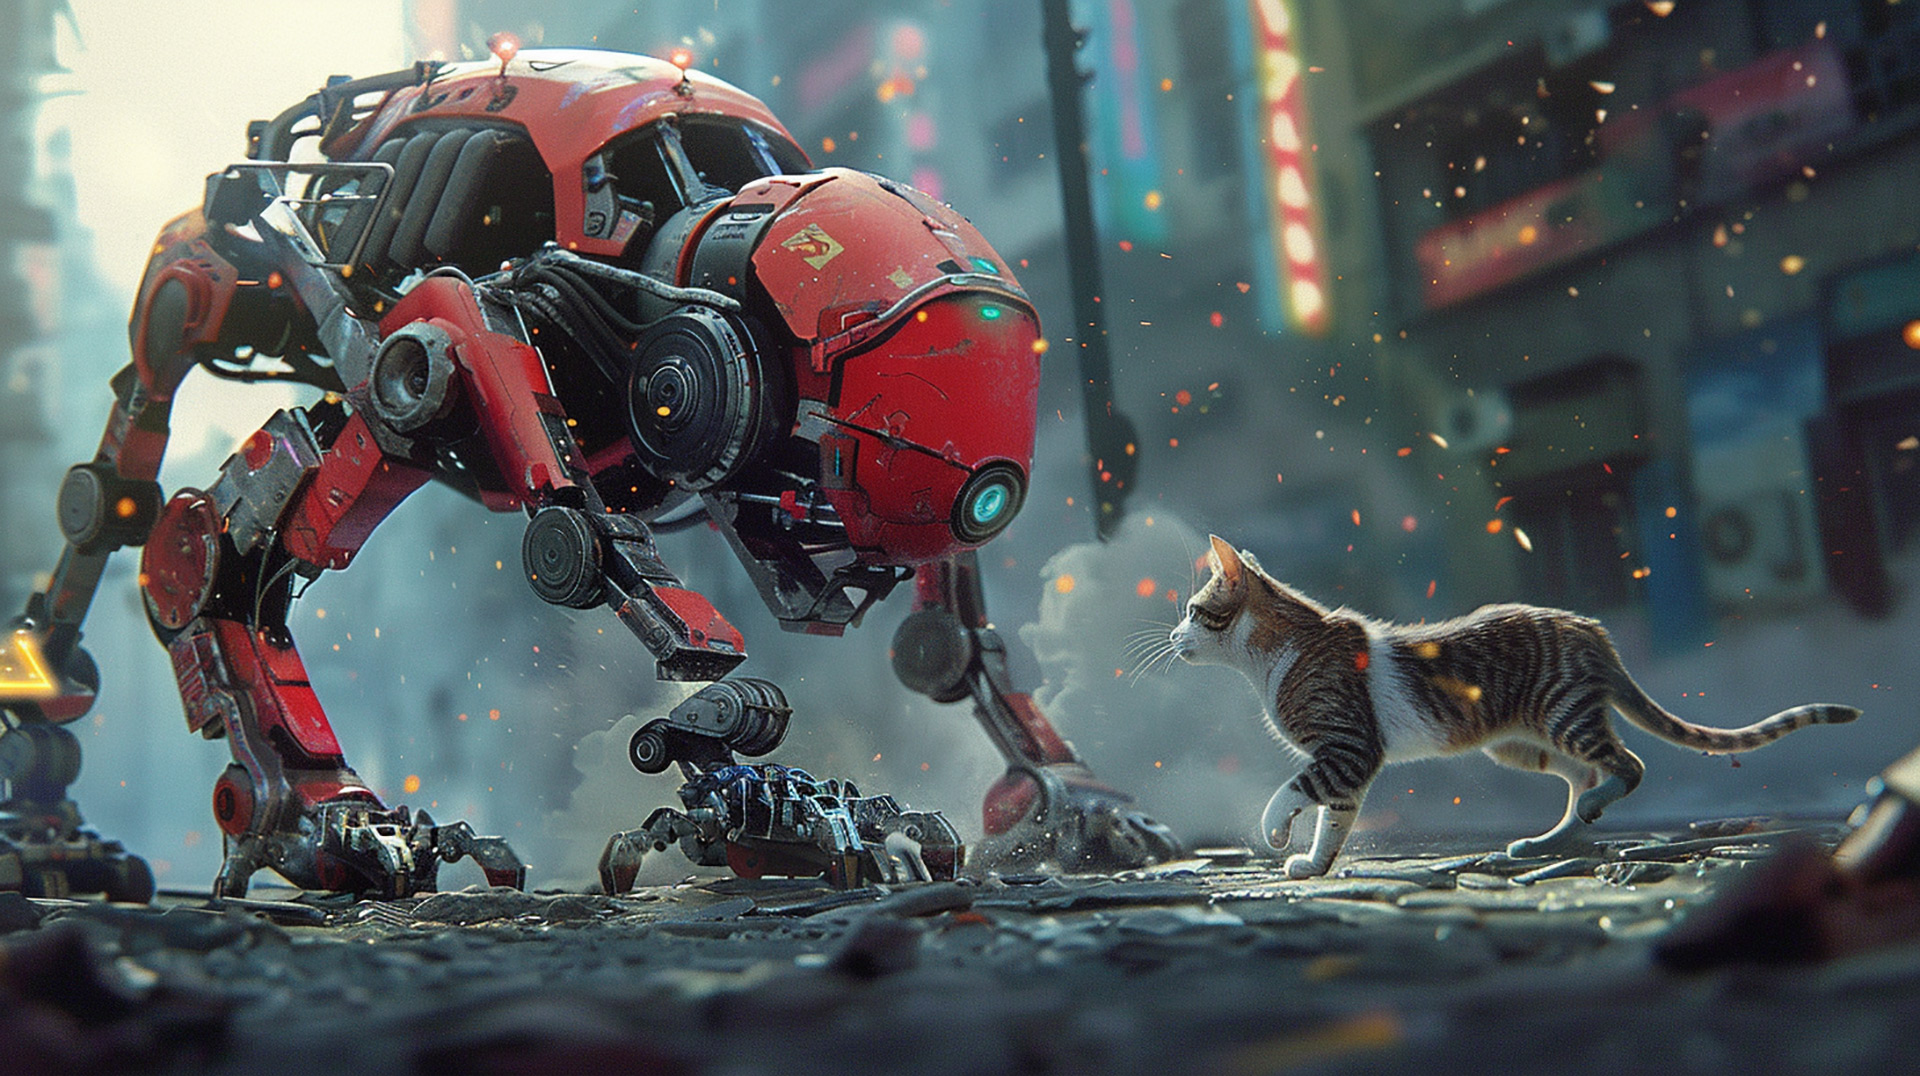 Dynamic Robot Cats Fighting: HD Wallpapers for Desktop